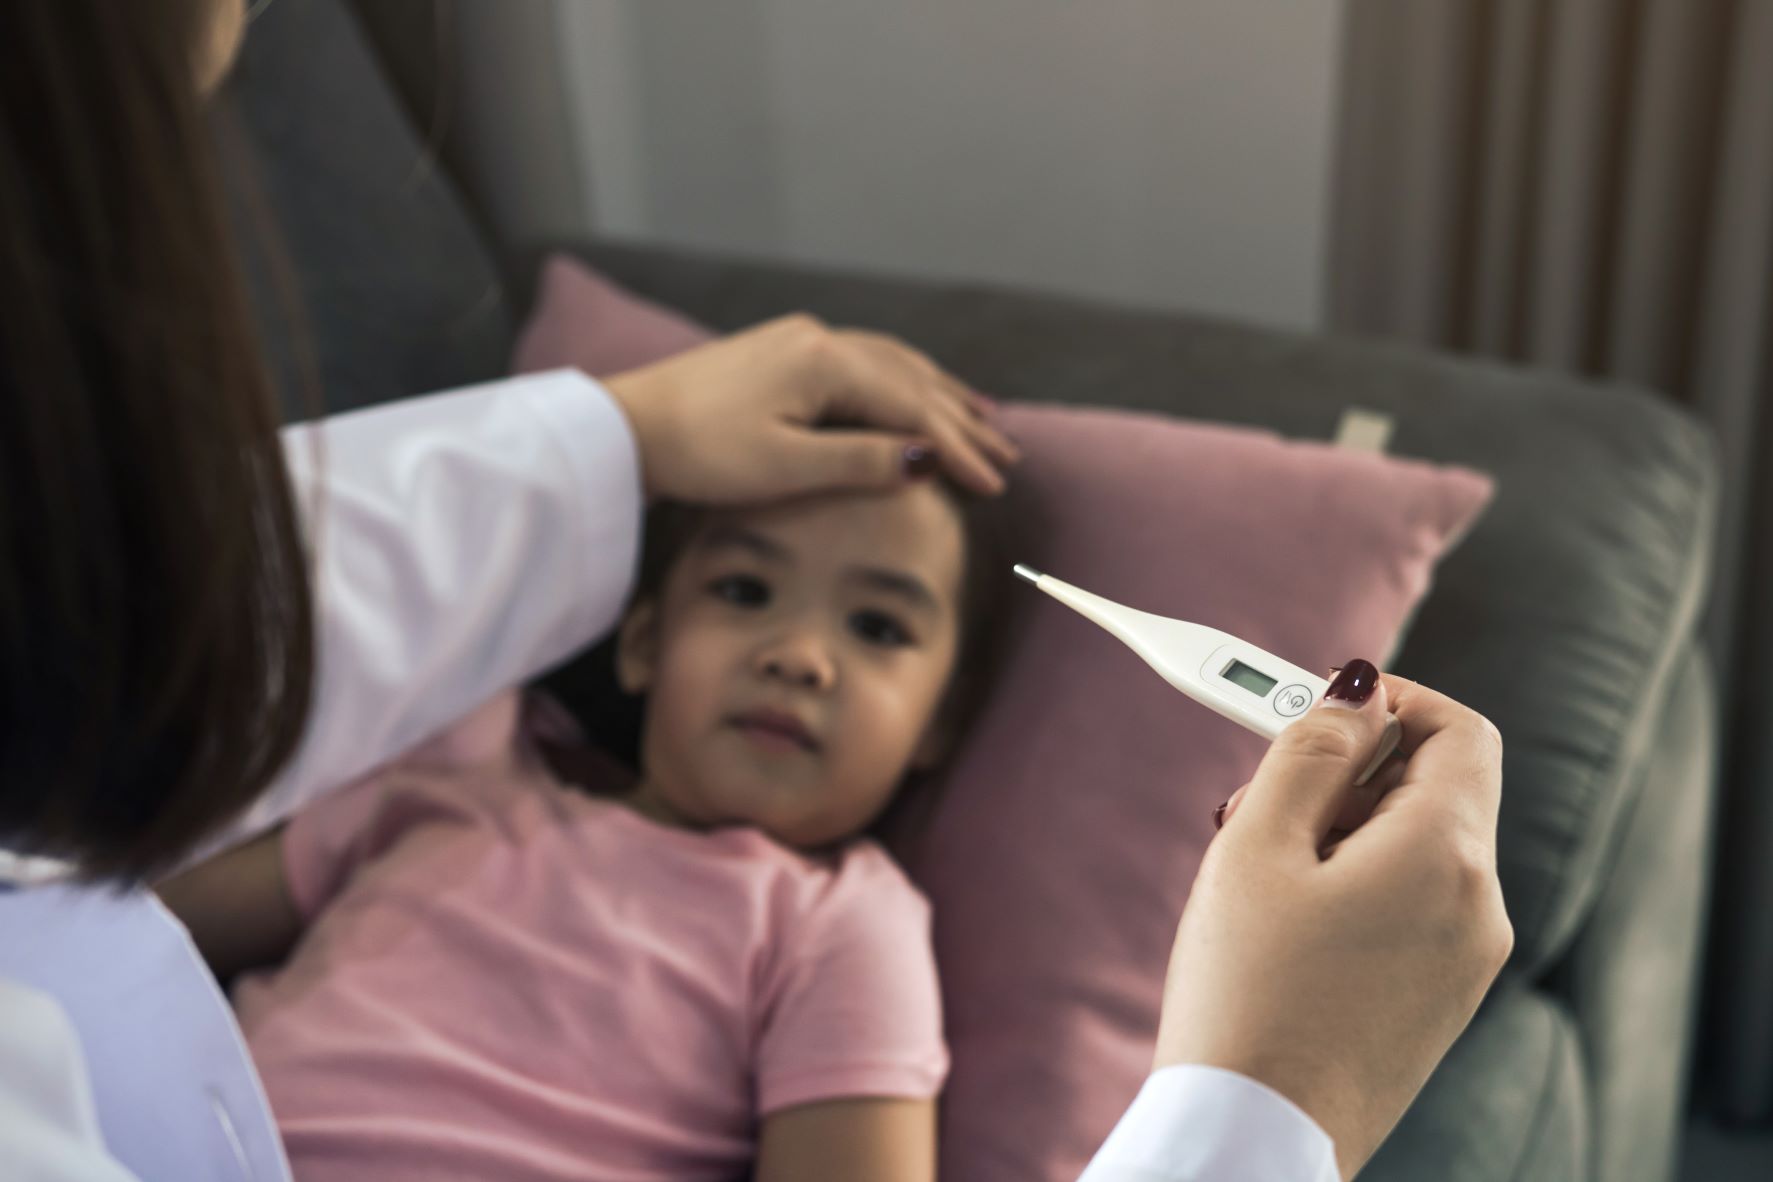 An adult is holding a thermometer in one hand and has their other hand on a child's forehead. The child is about three years old and is lying in bed on a pink pillow.